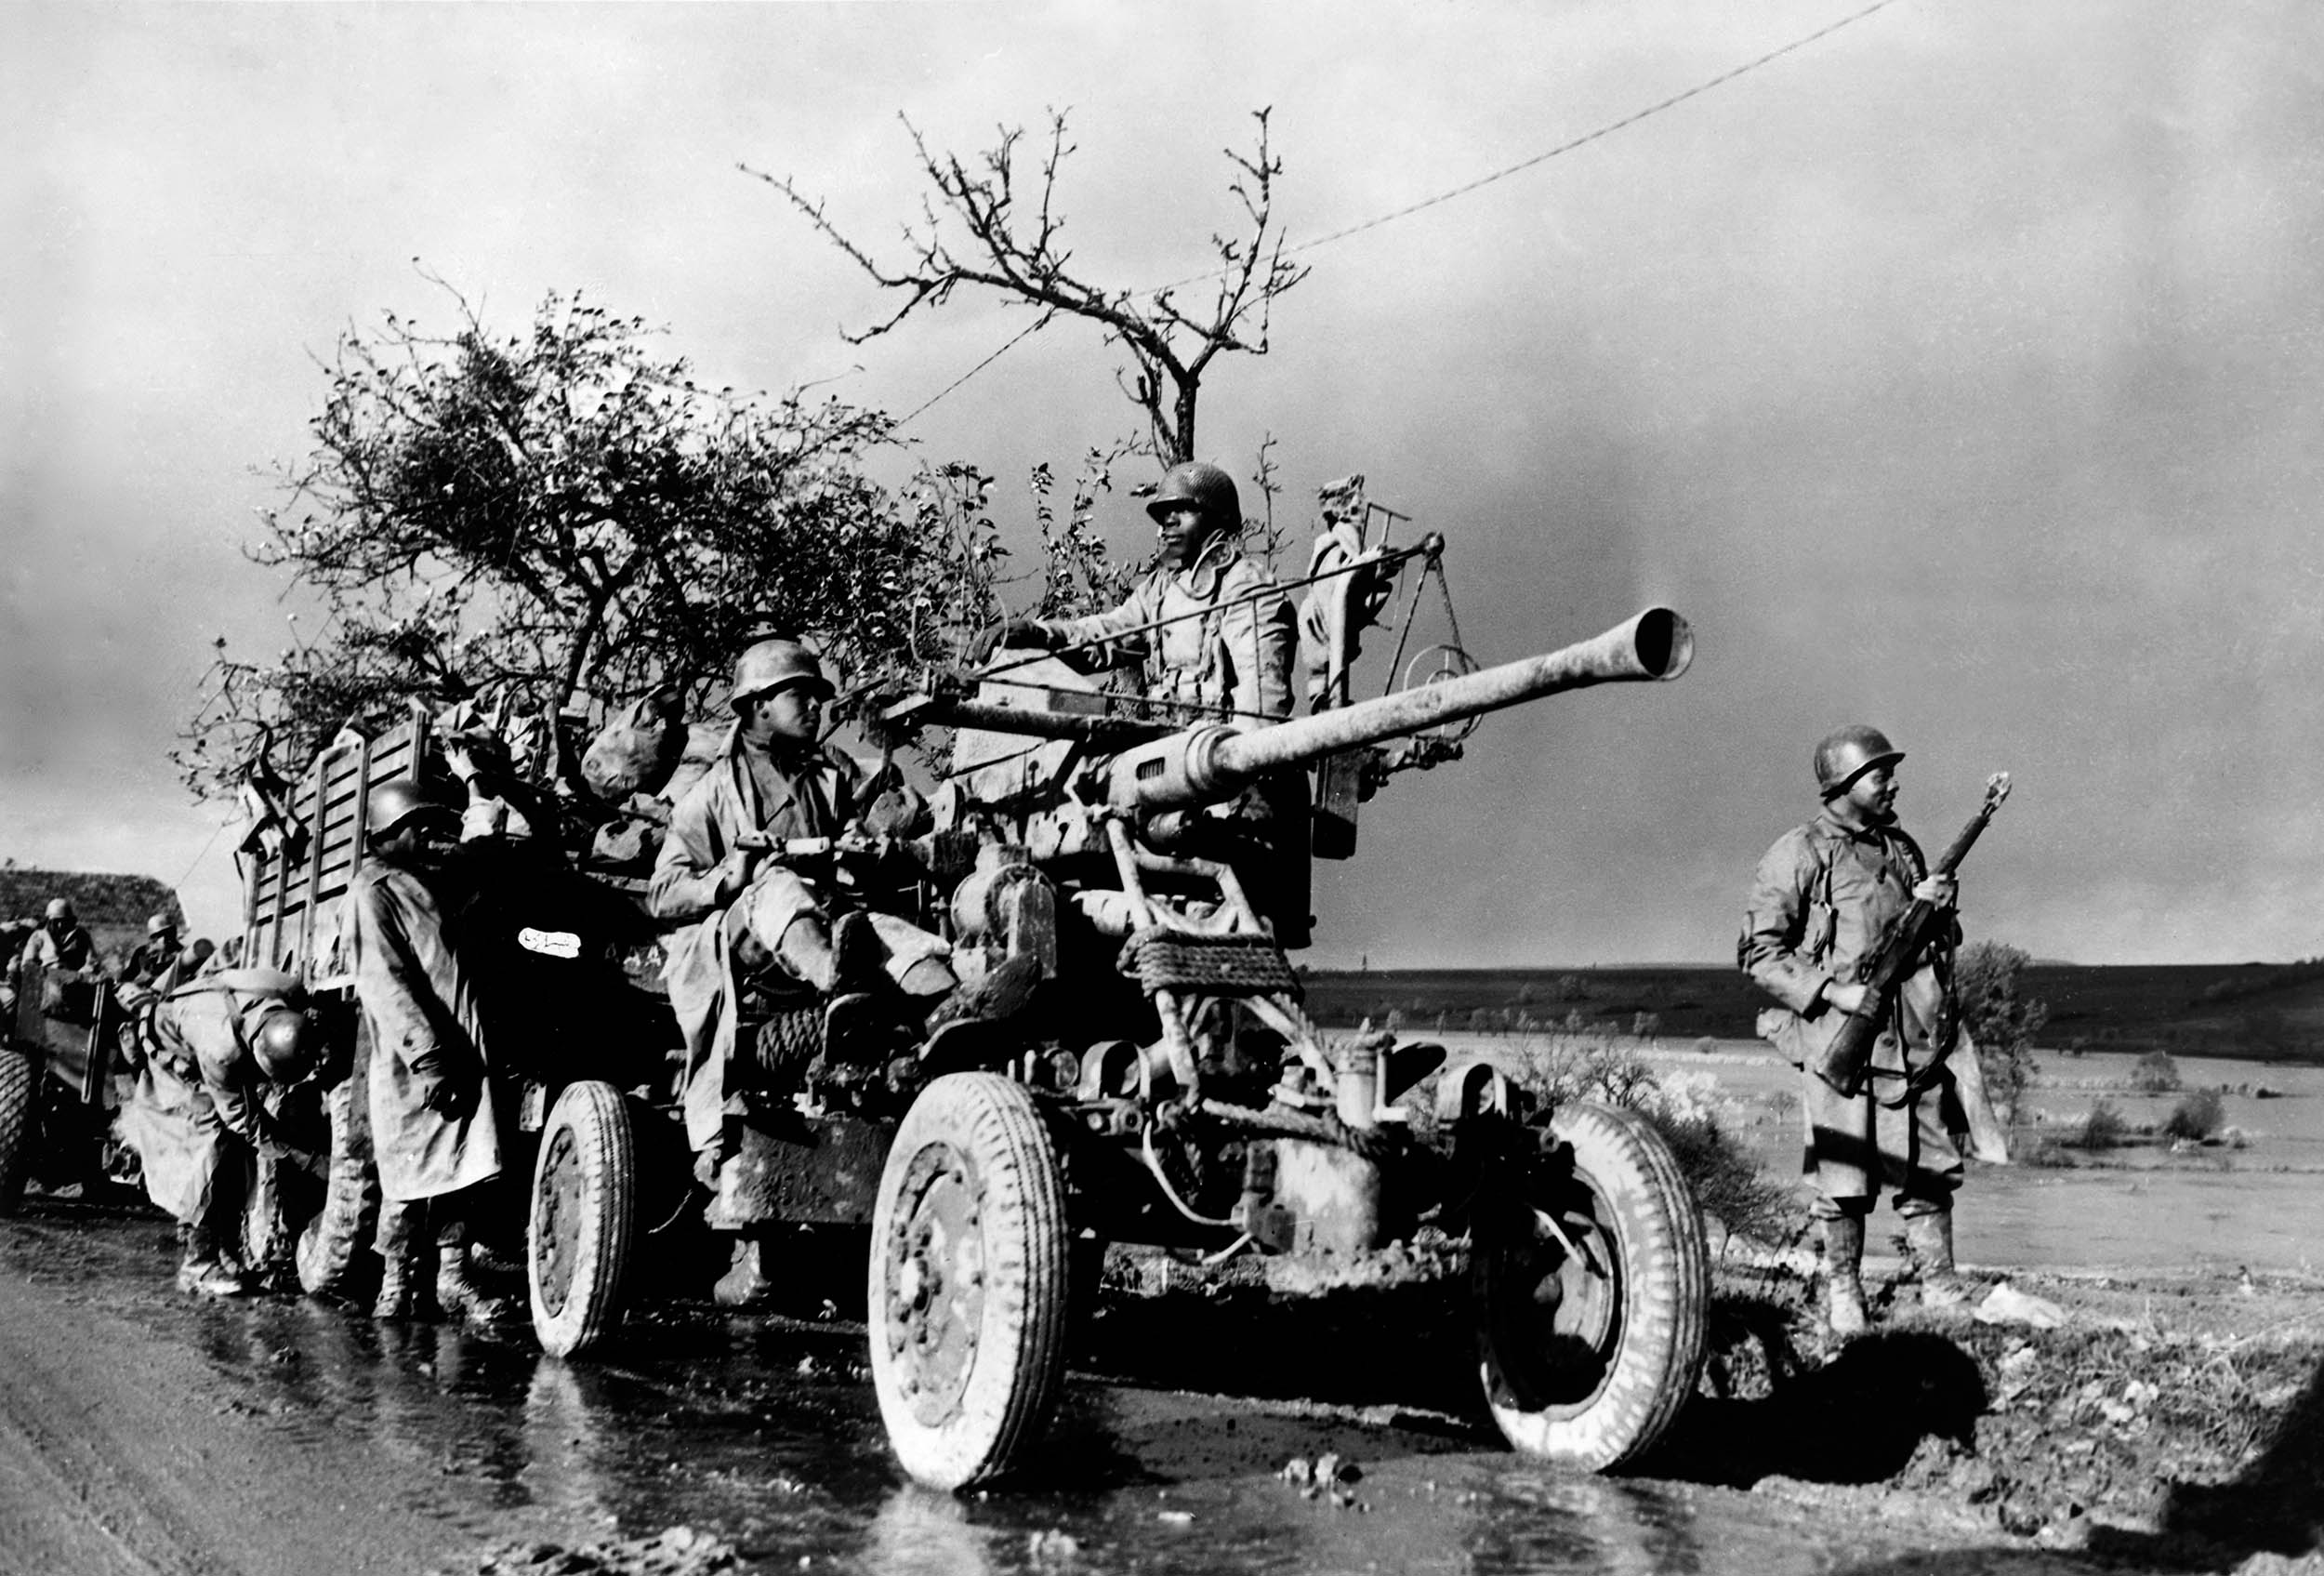 Soldiers with the 452nd Antiaircraft Artillery Battalion stand by and check their equipment during convoy in Belgium, November 4, 1944 (U.S. Army Signal Corps/Library of Congress)